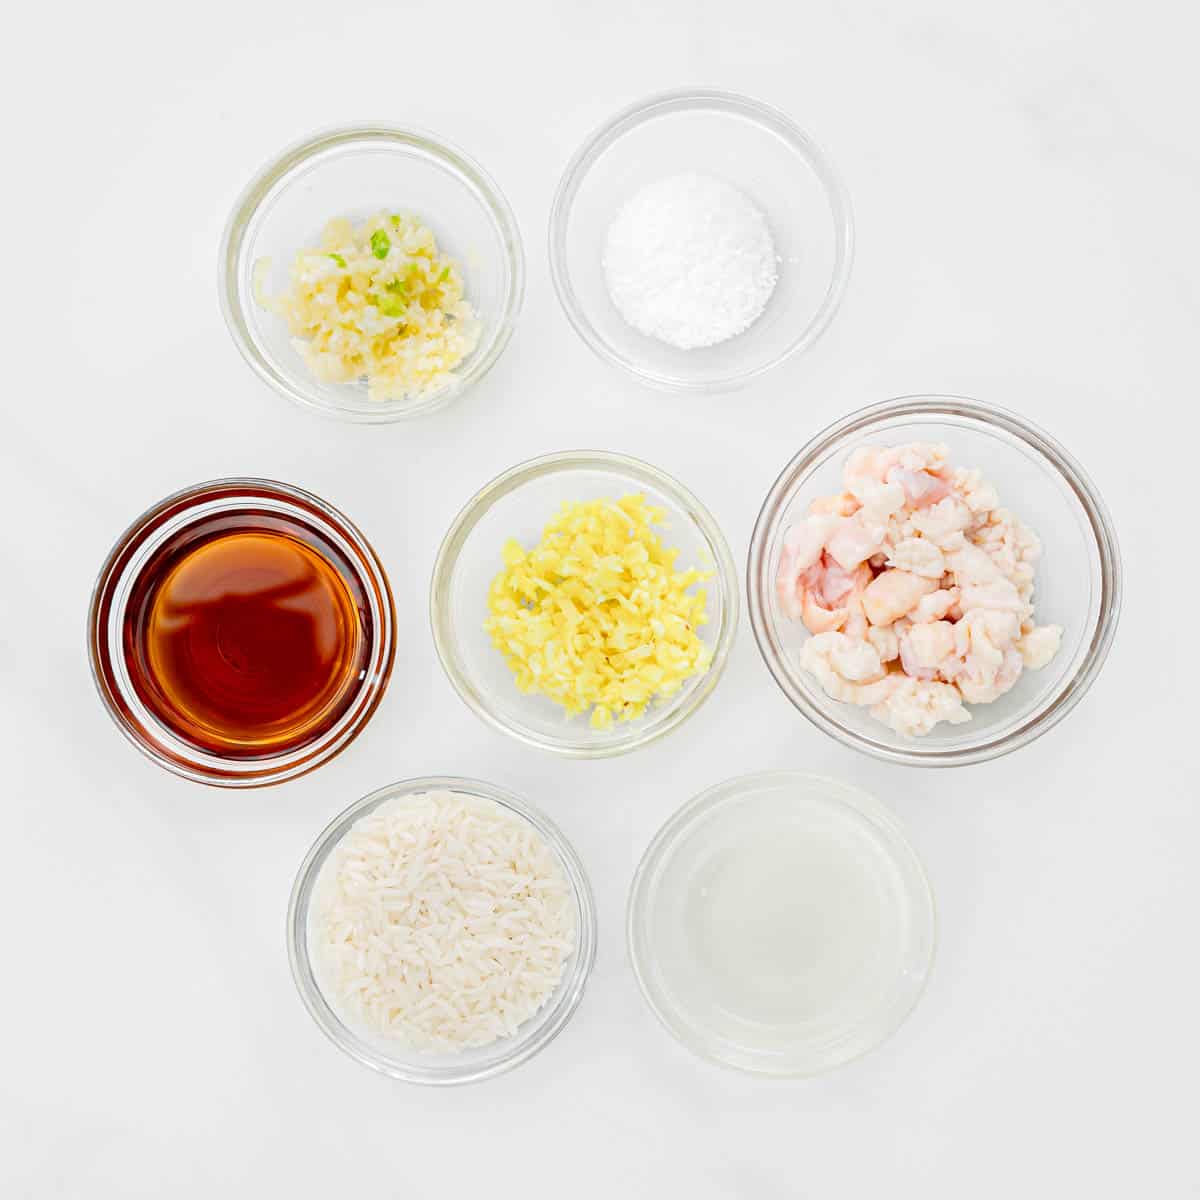 The Ingredients for Garlic Ginger Rice